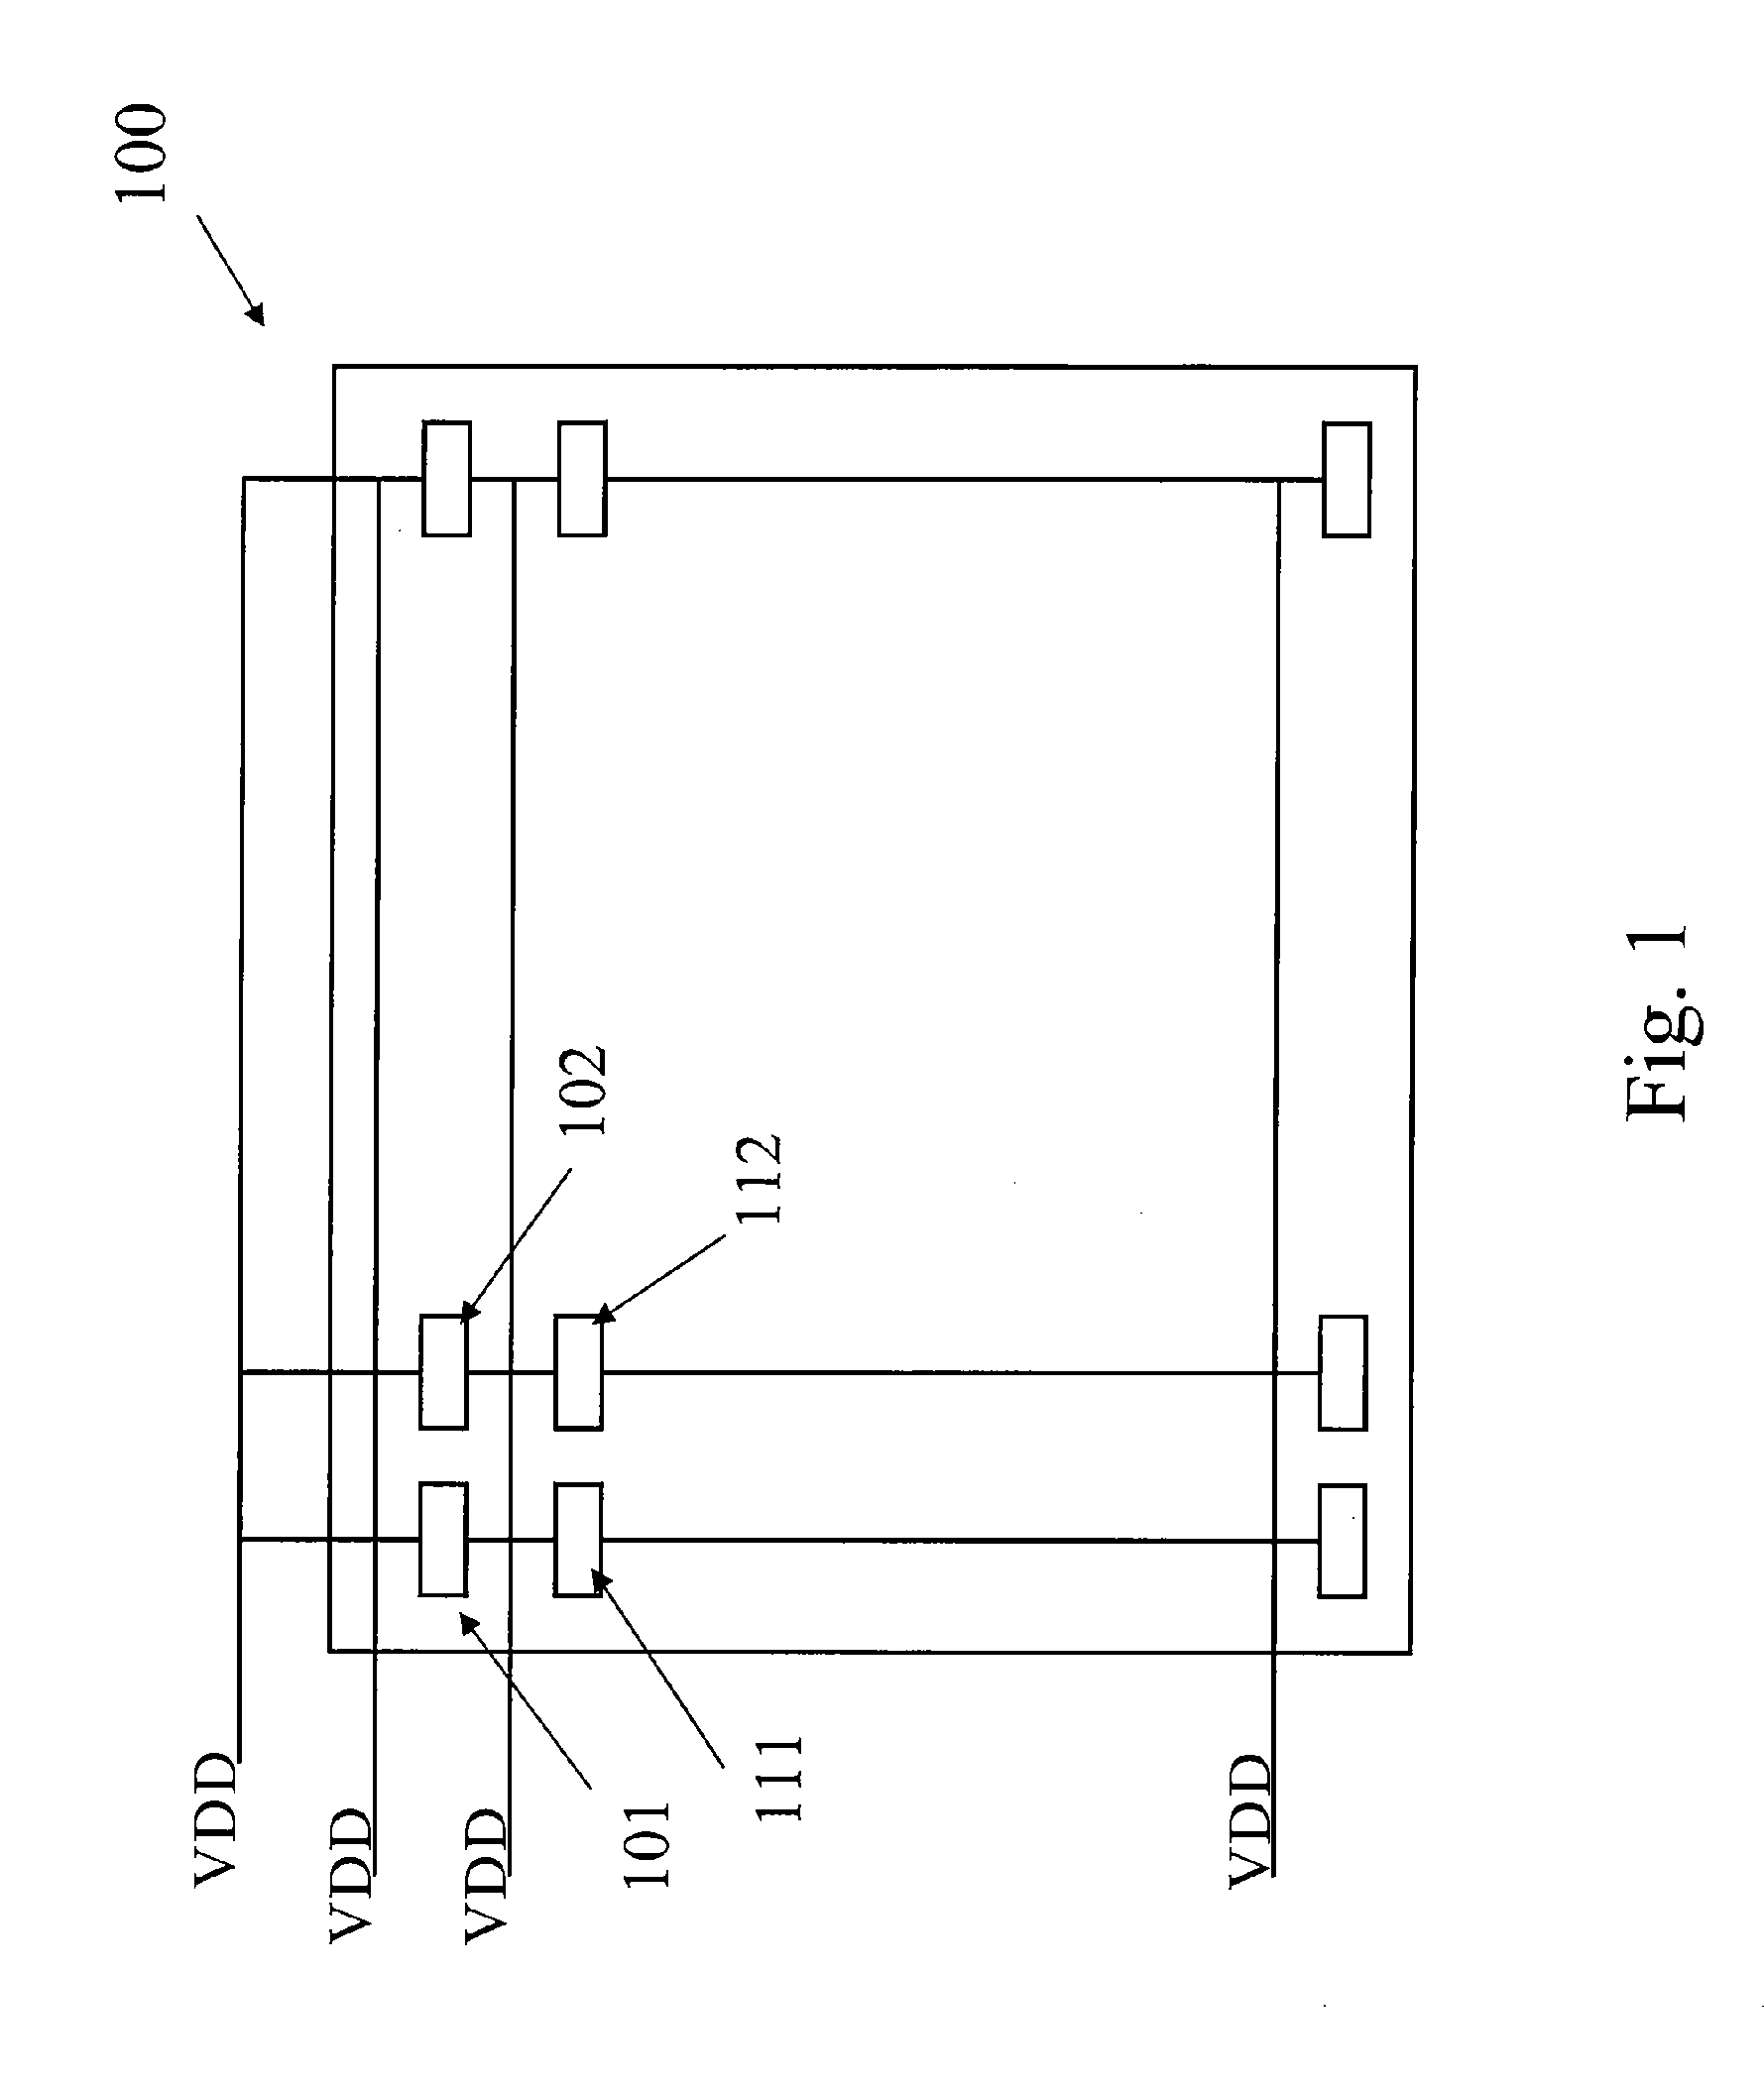 Power line decoding method for an memory array